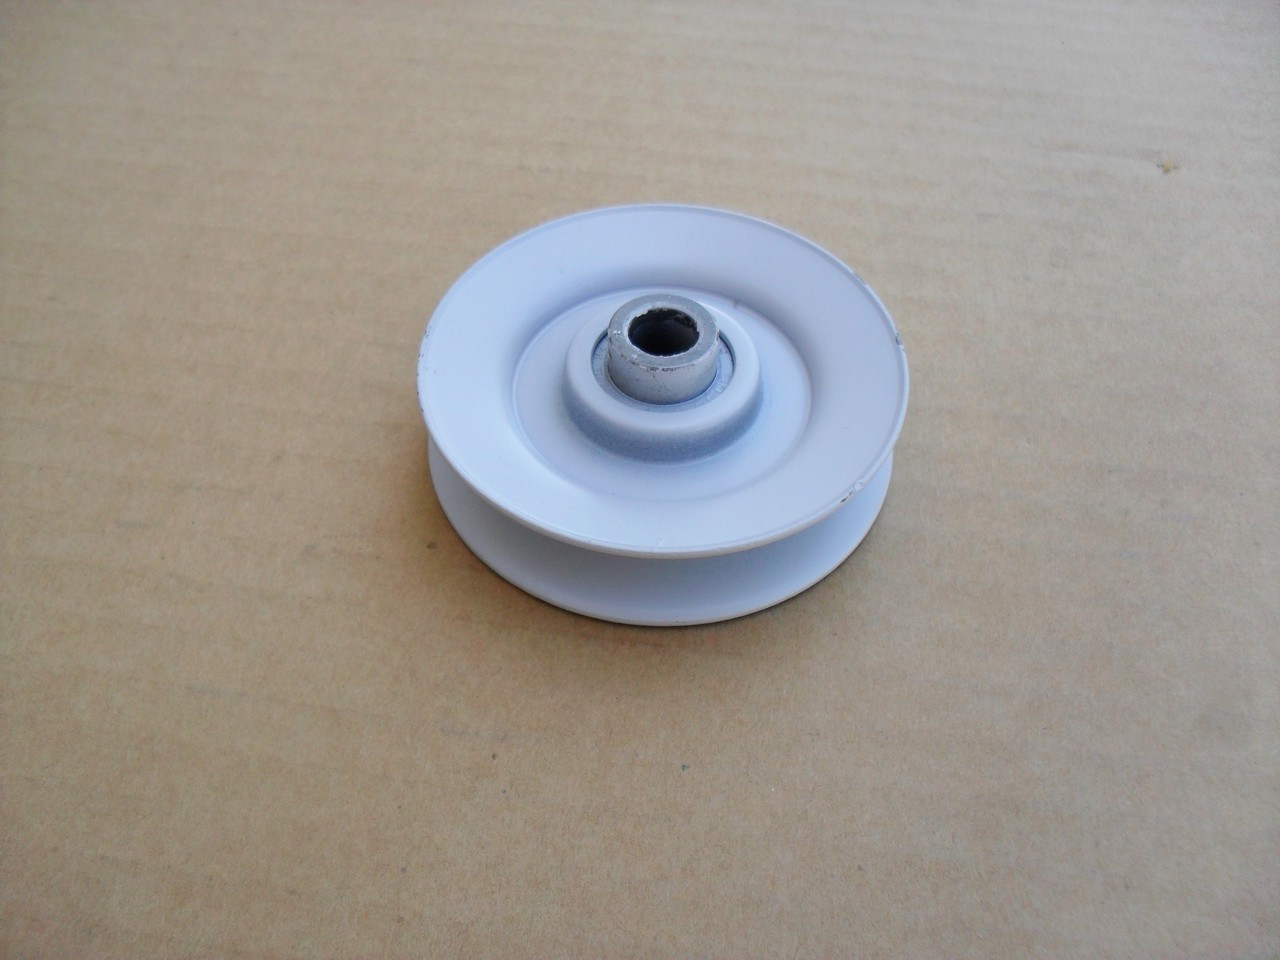 Idler Pulley for Case C23456 Height: 5/8" ID: 3/8" OD: 2-5/8" Made In USA